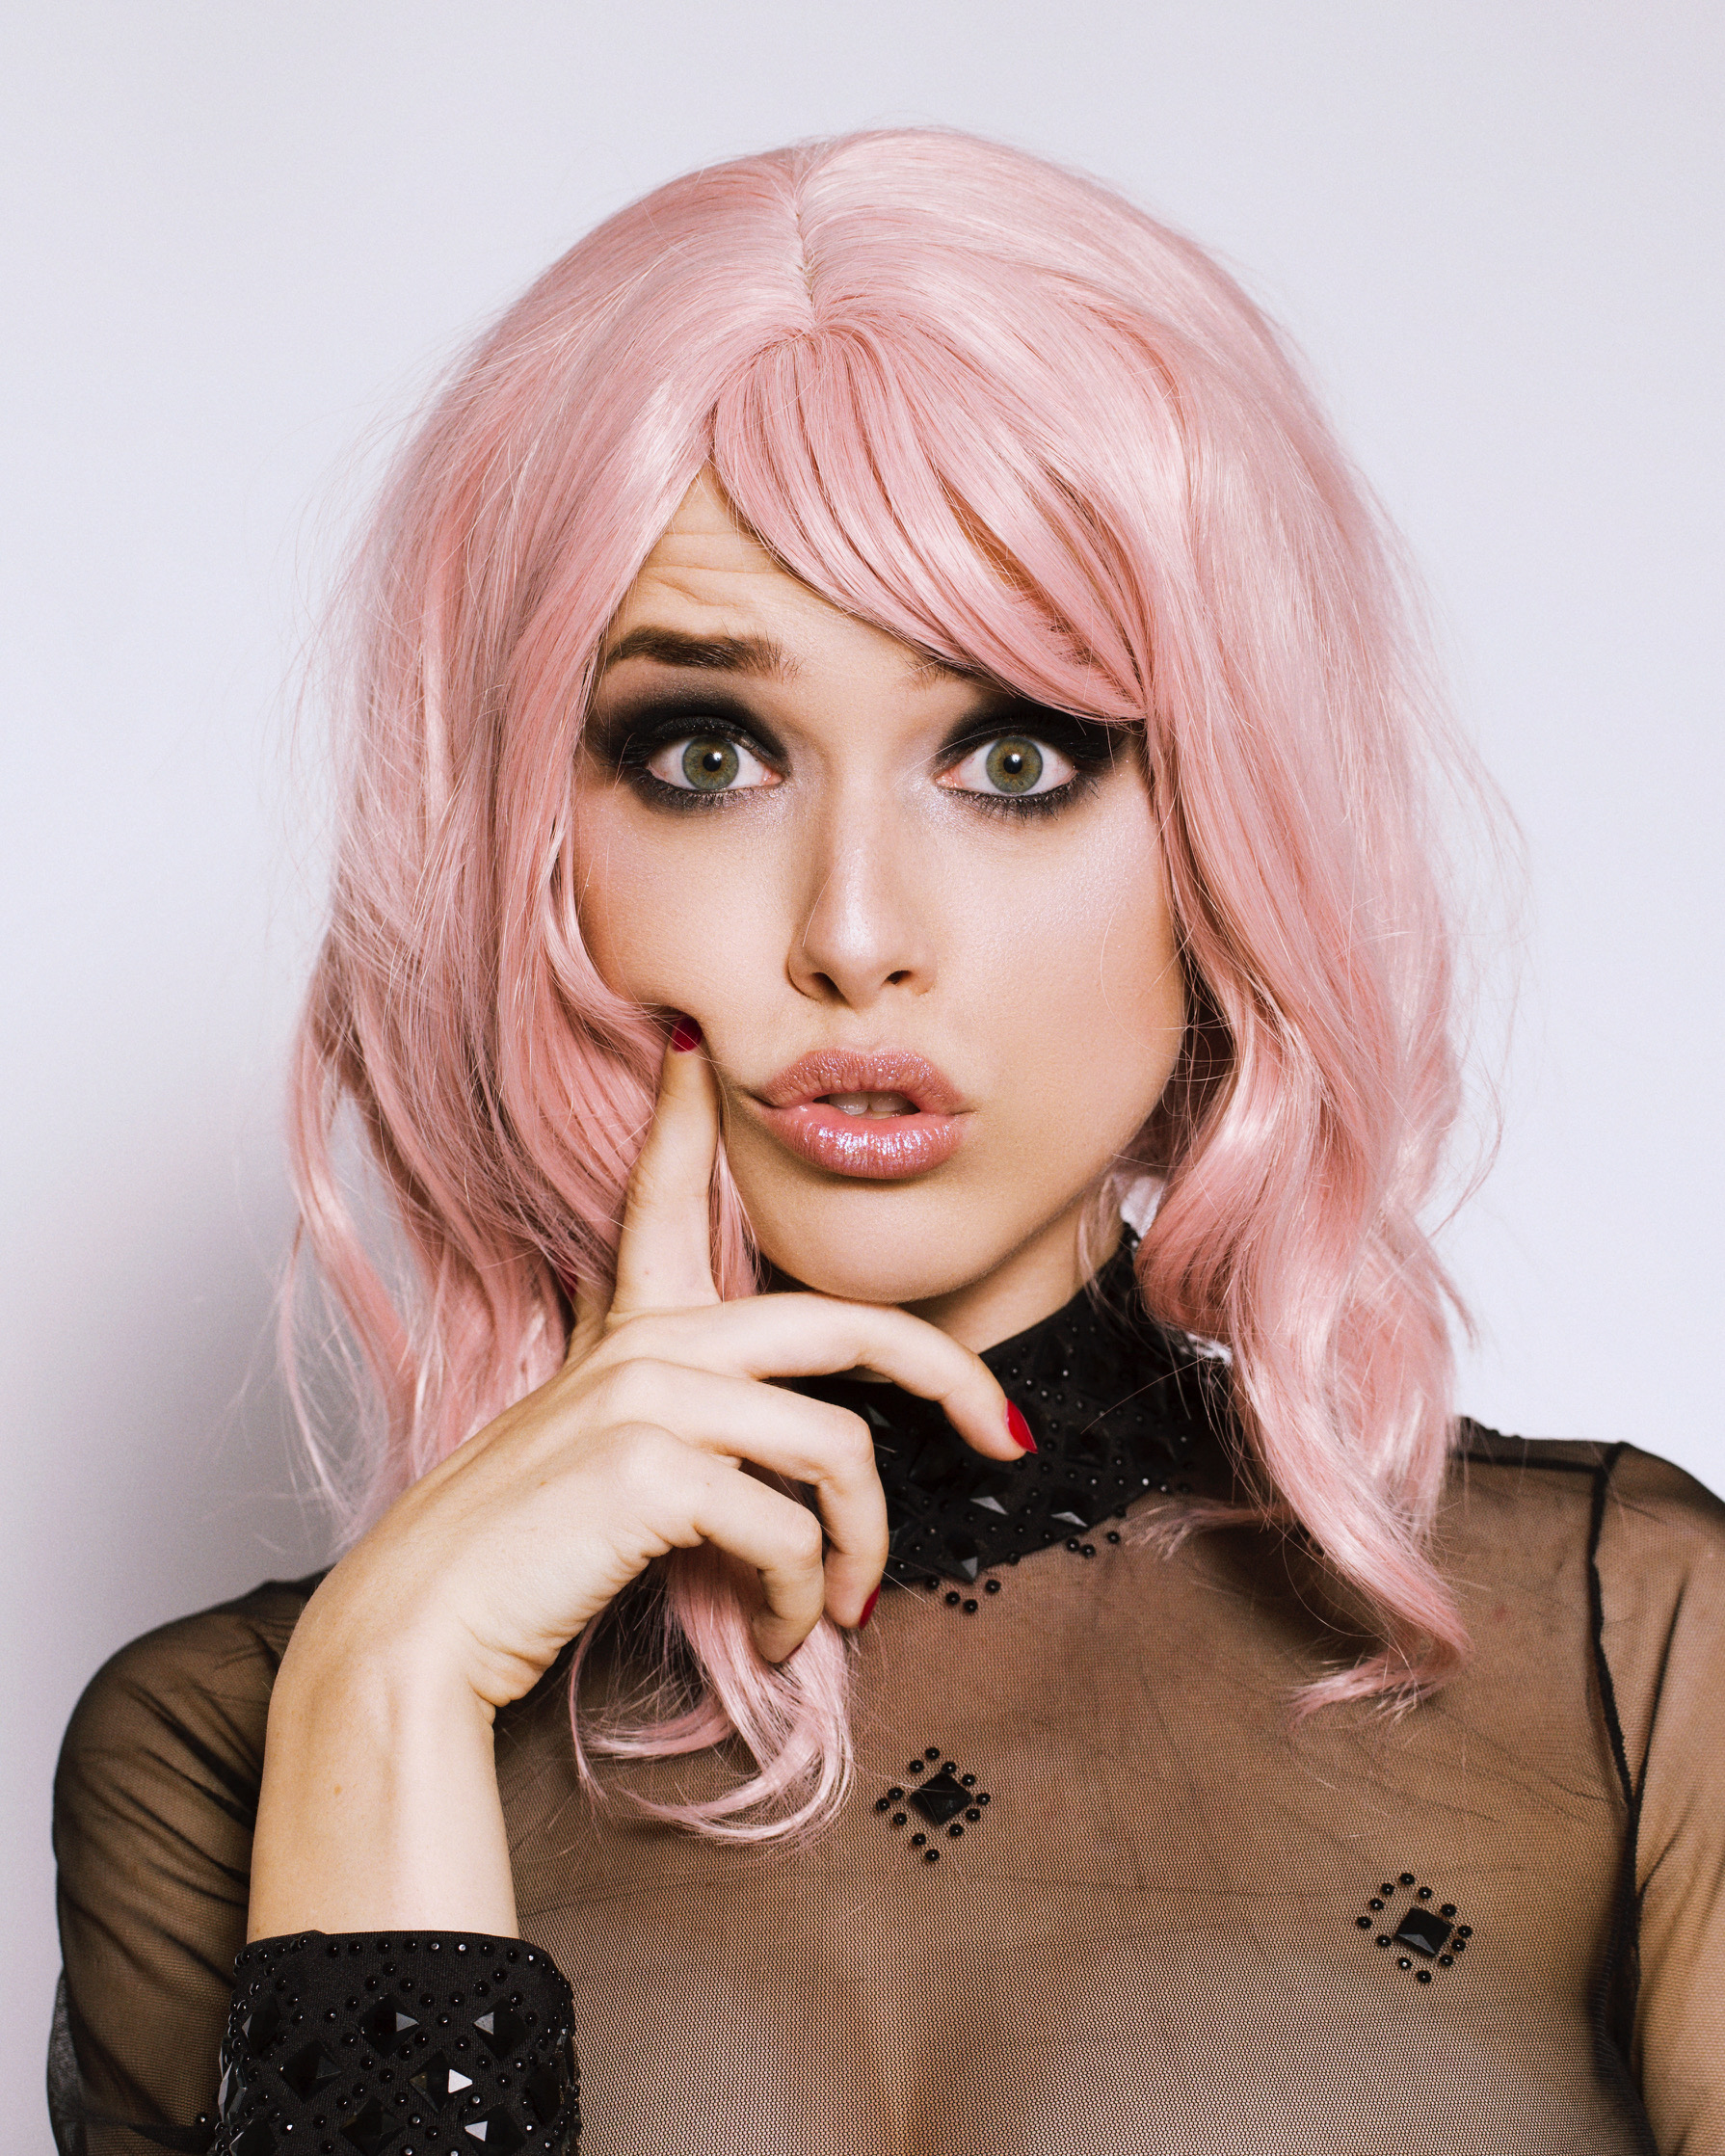 People 1790x2237 Lauren Summer women model pink hair pink lipstick red nails portrait display face touching face